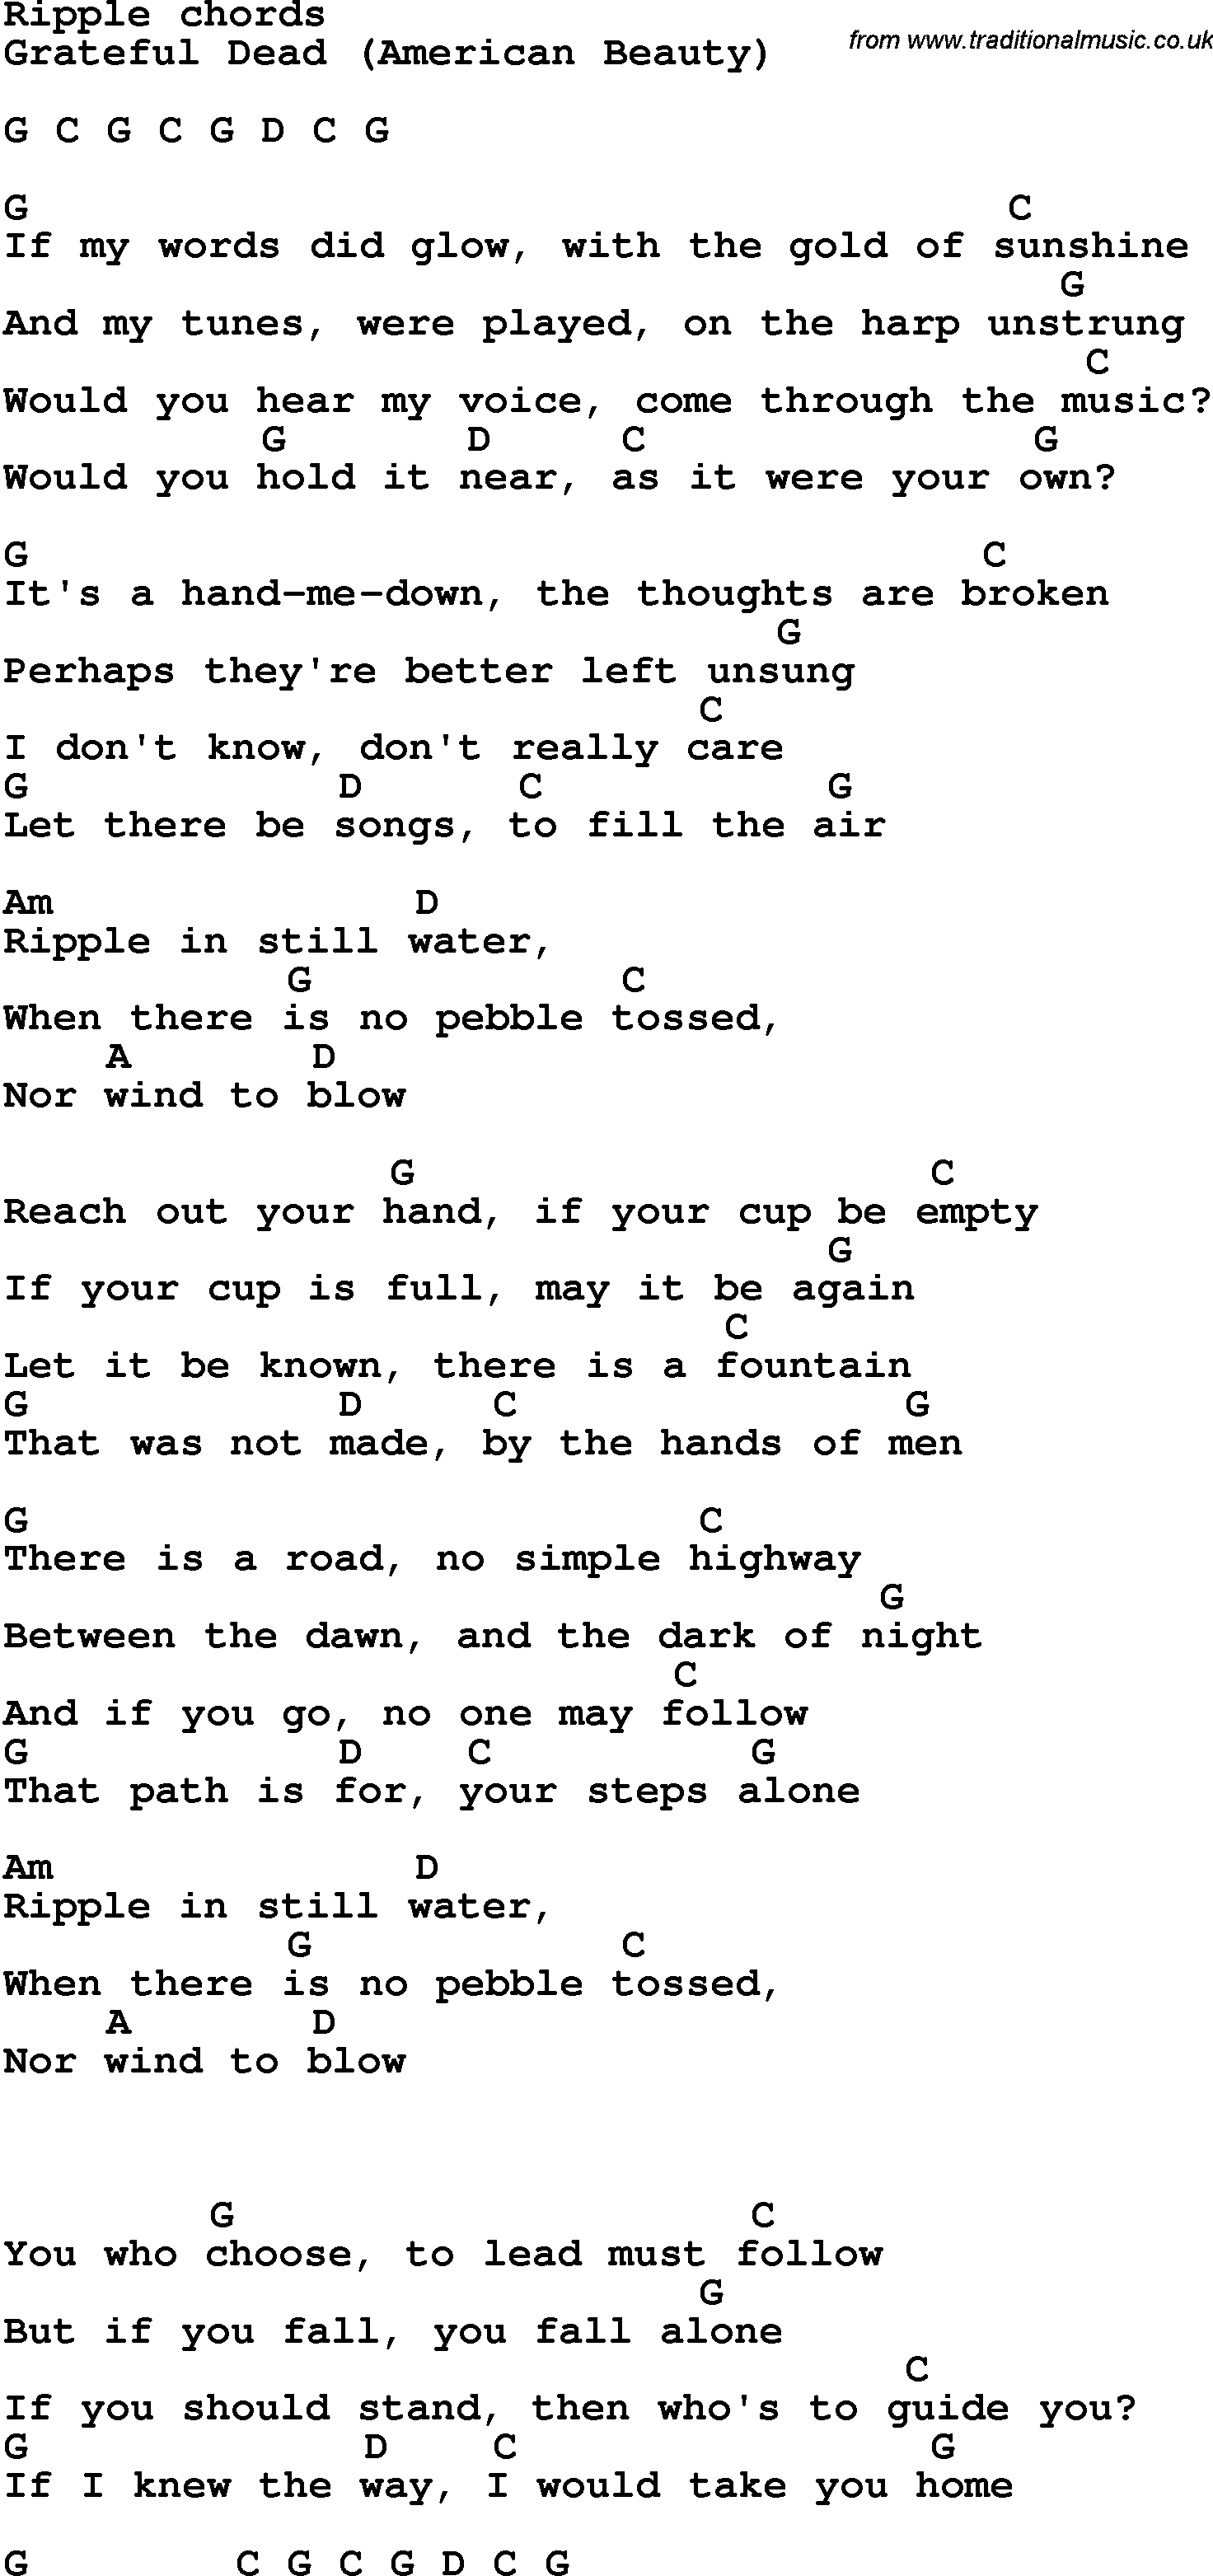 Song Lyrics with guitar chords for Ripple